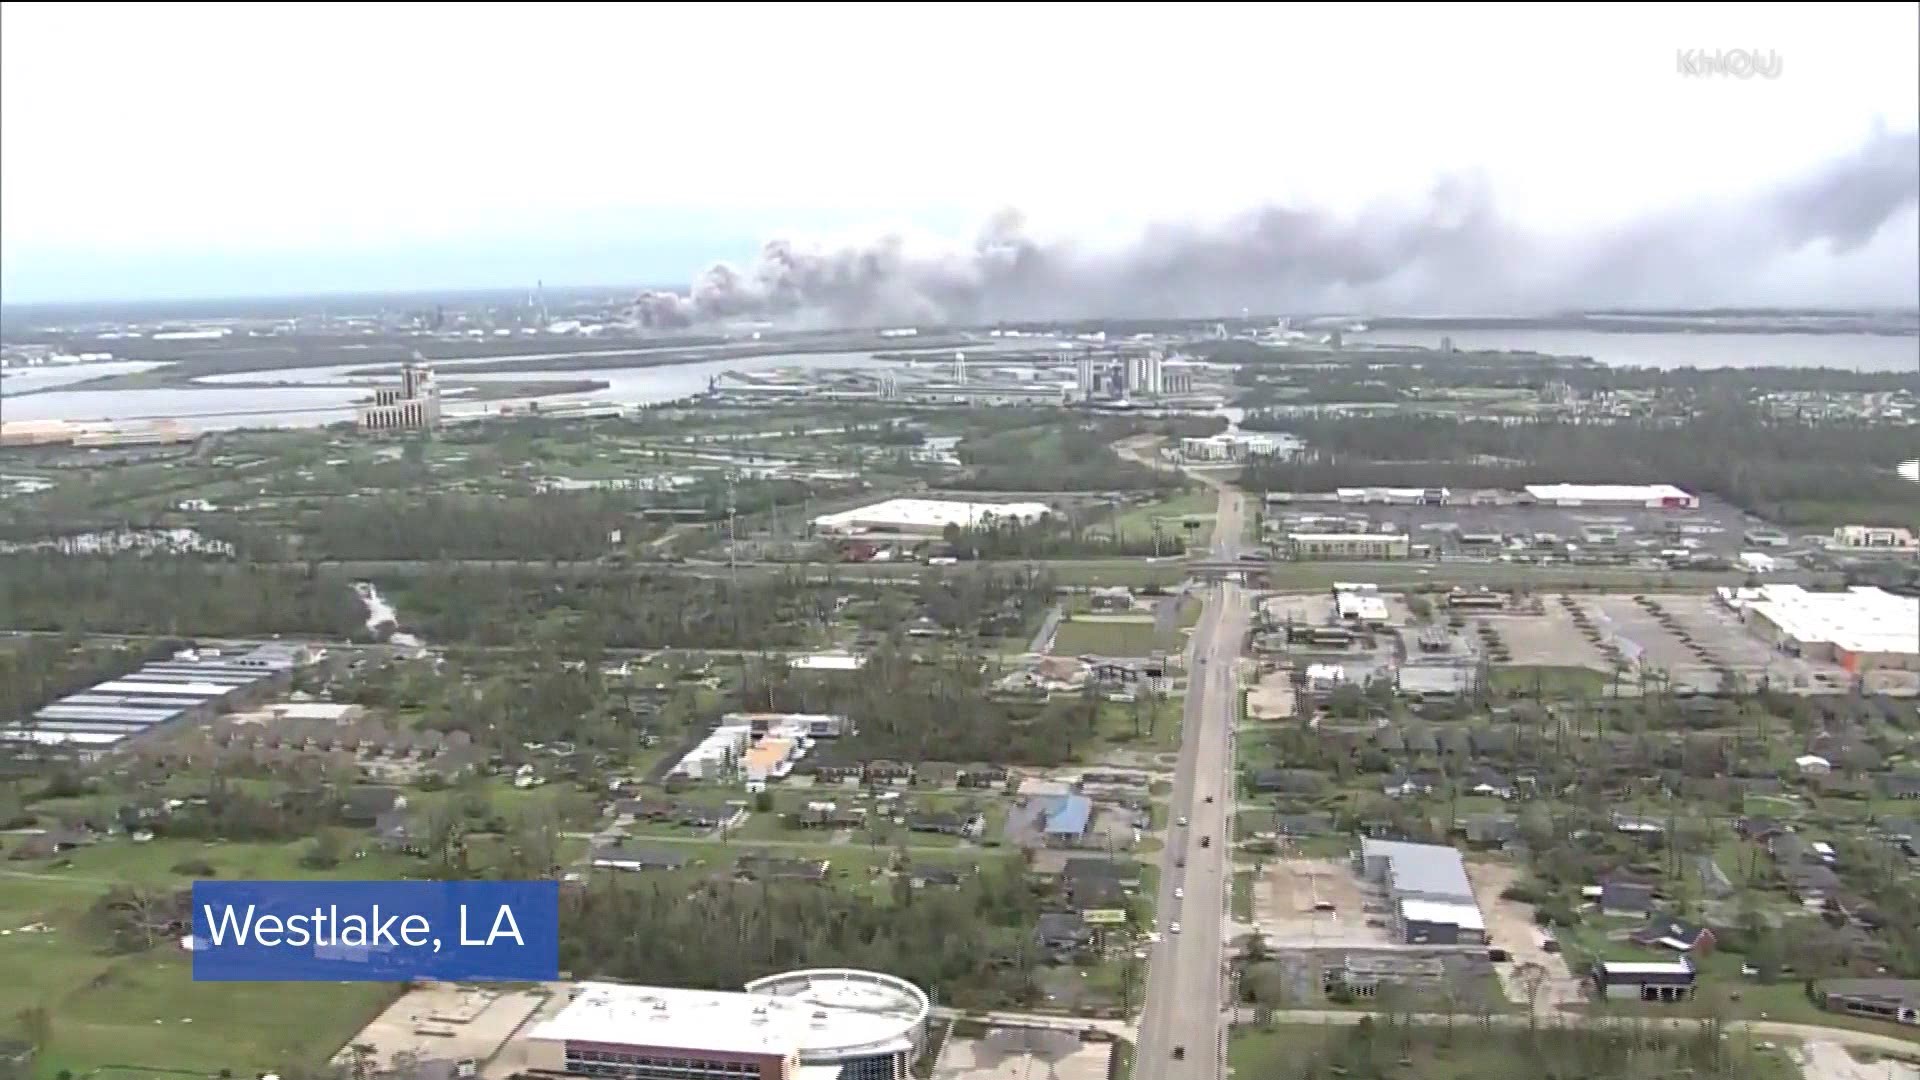 A chemical plant caught fire in Westlake, LA Thursday, spewing thick smoke into the air, hours after Hurricane Laura hit the area.